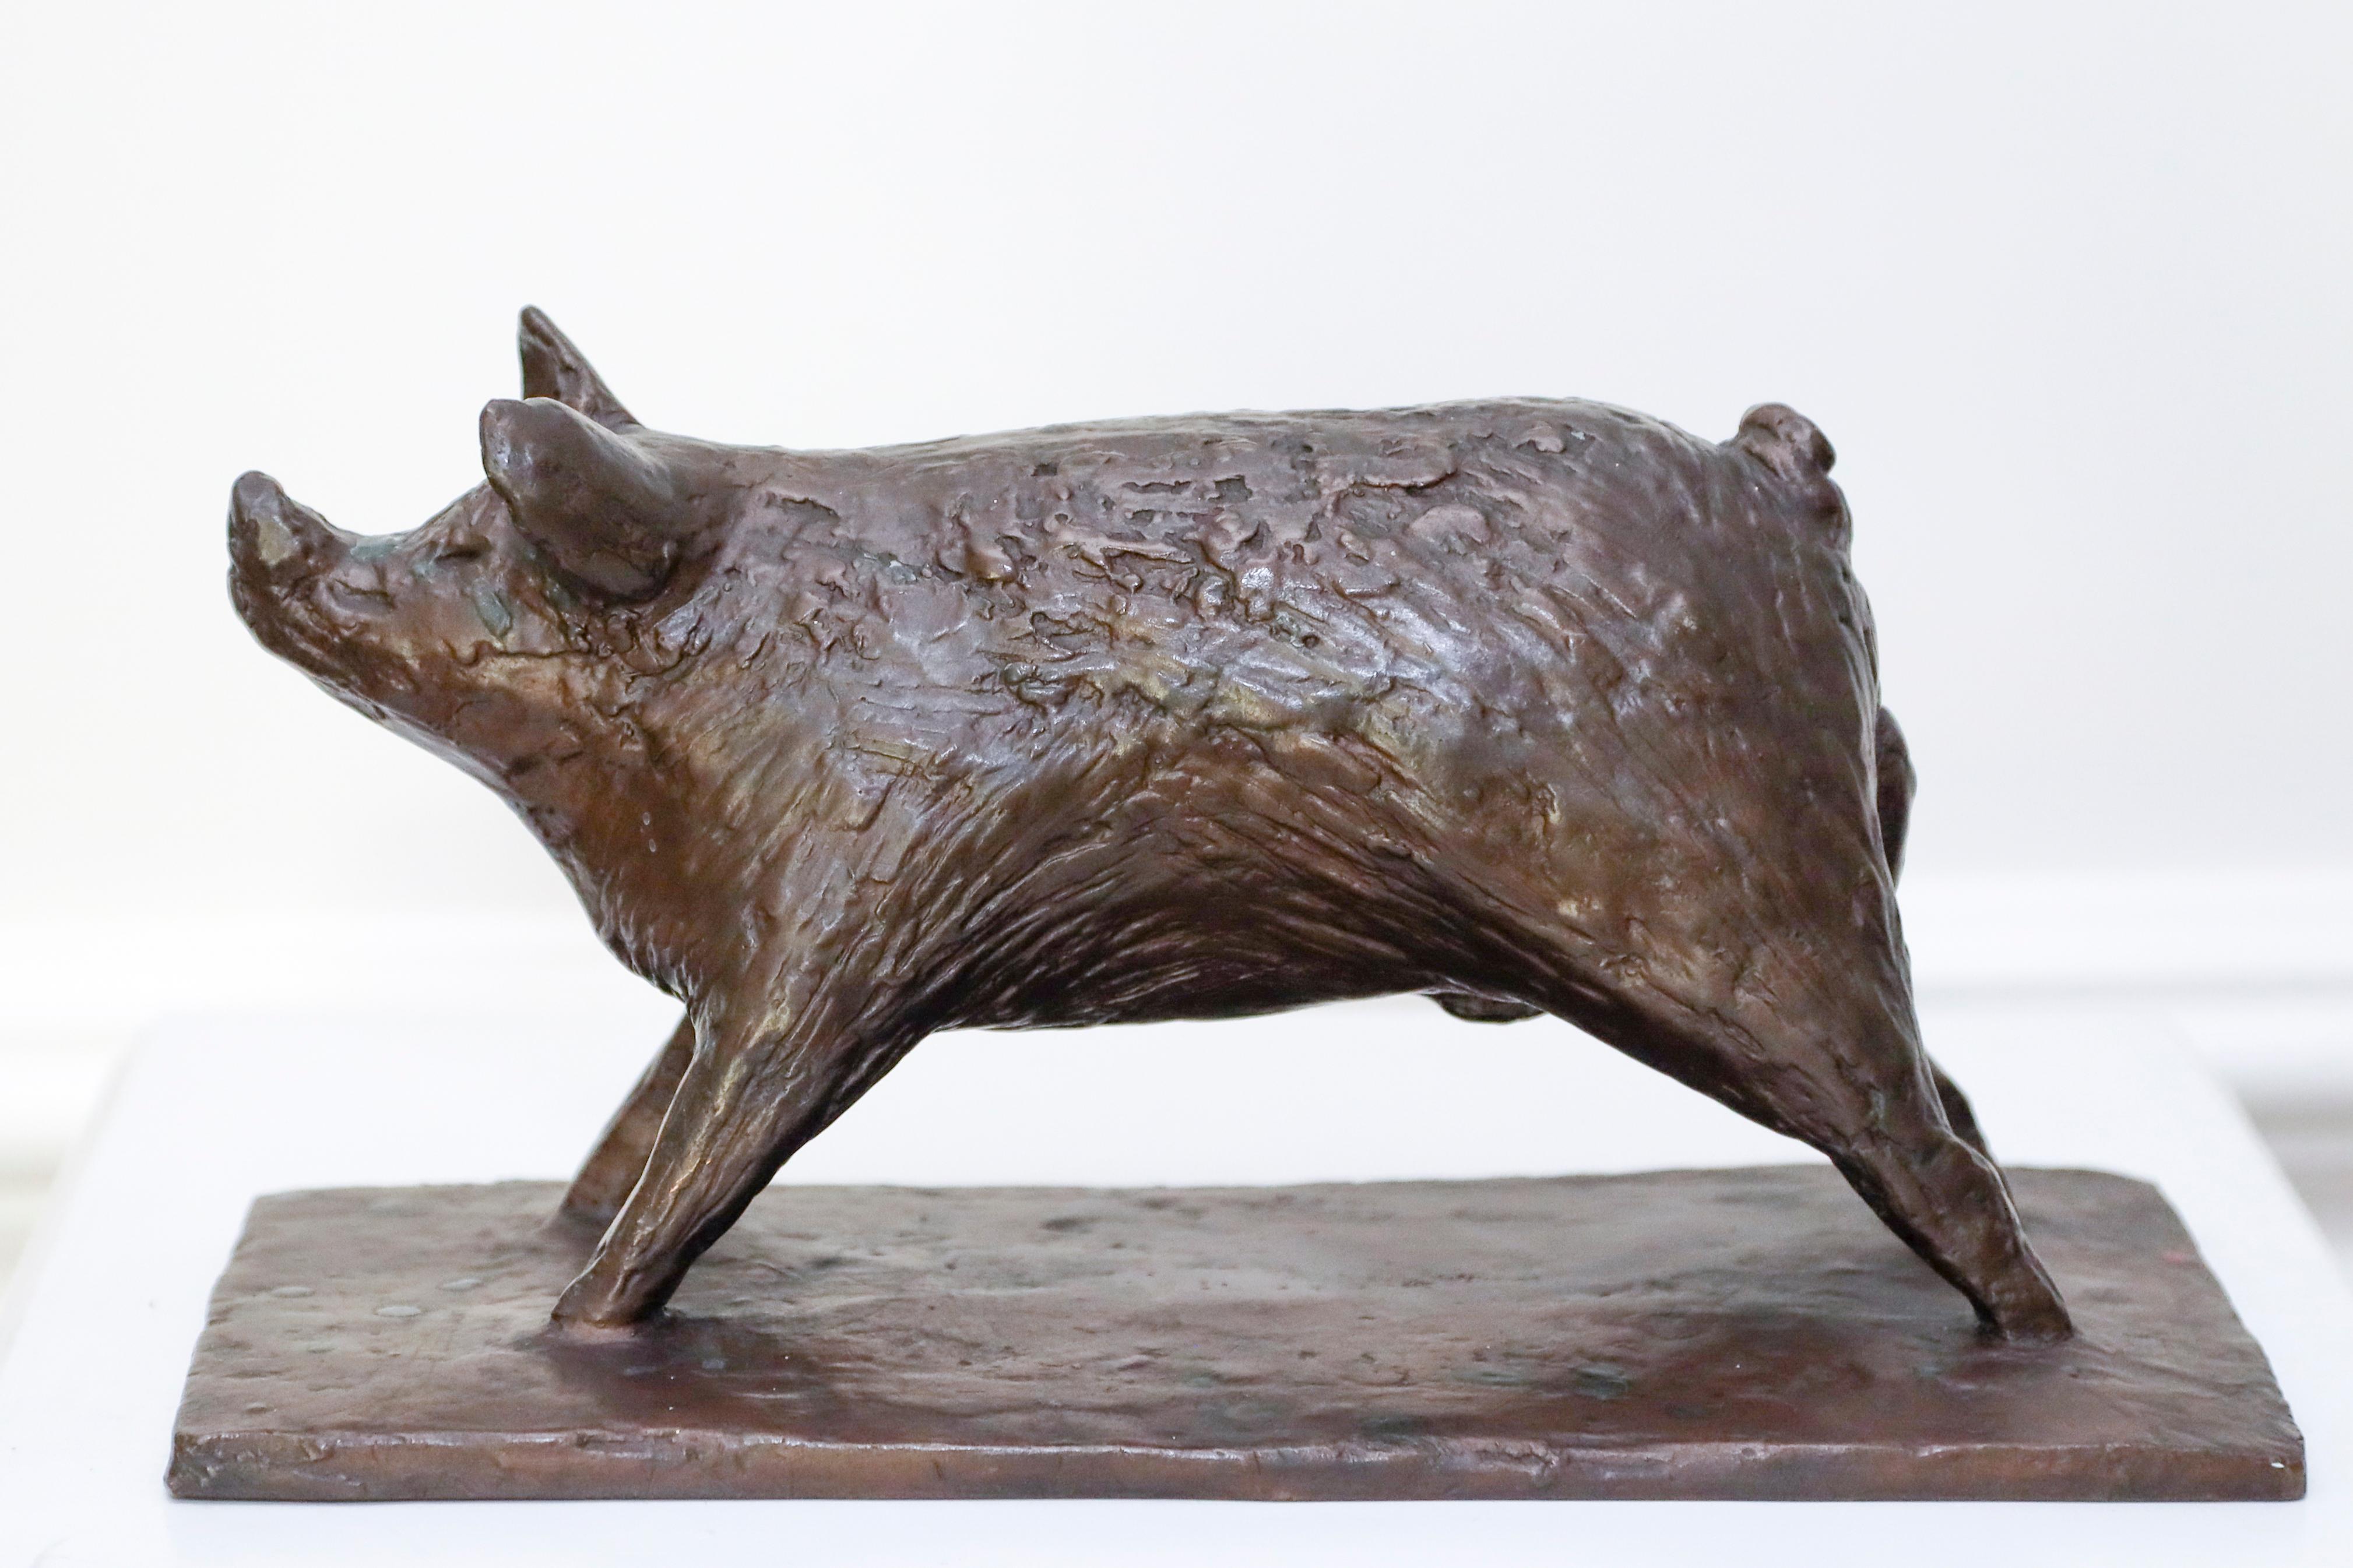 A Bronze Sculpture of a Young Boar  ( sculpture of a pig) - Gold Still-Life Sculpture by Rosalind Stracey